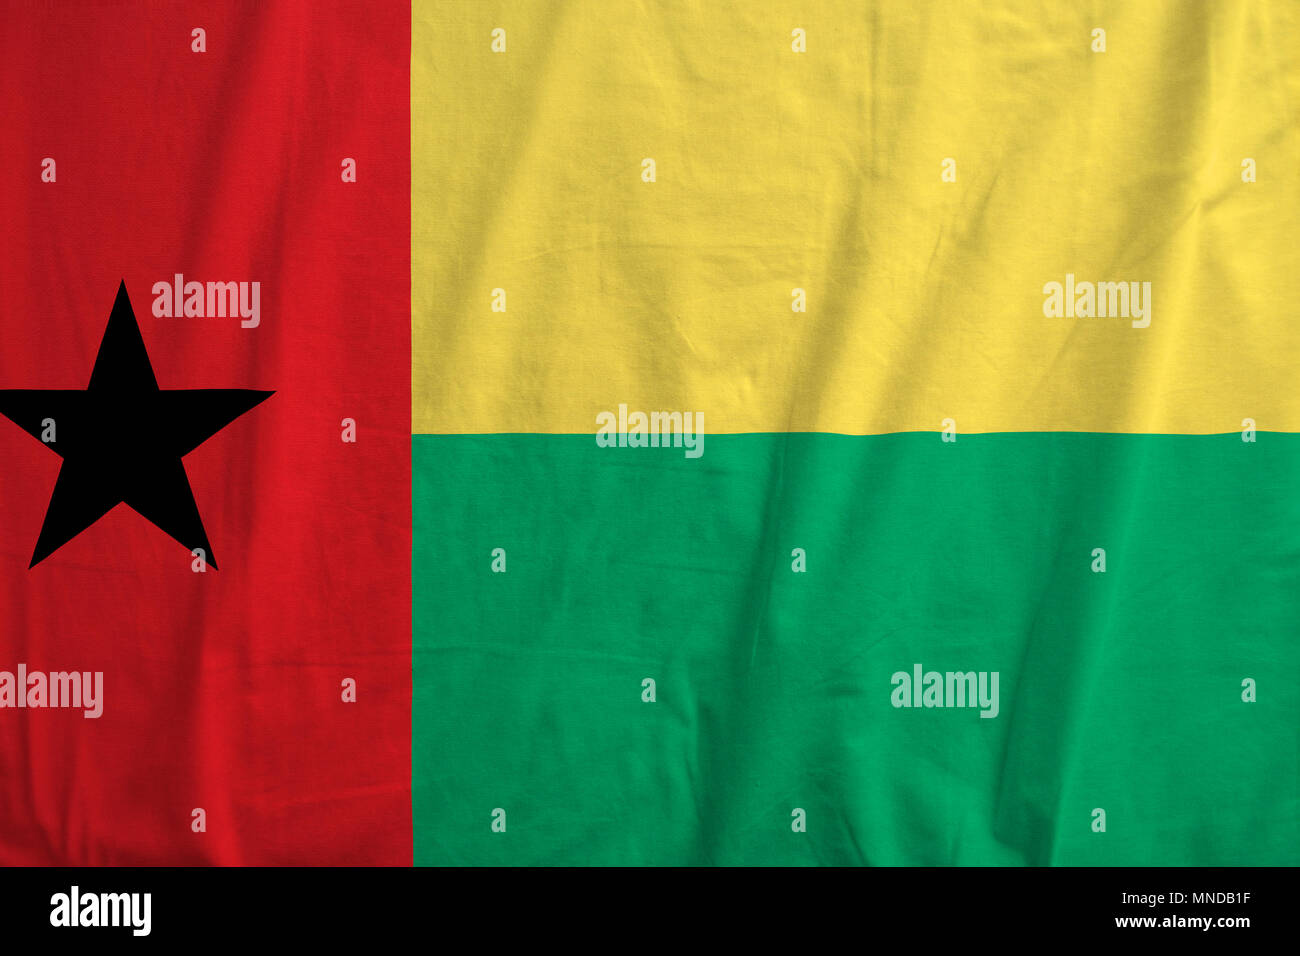 Fabric texture of the flag of Guinea Bissau. Stock Photo